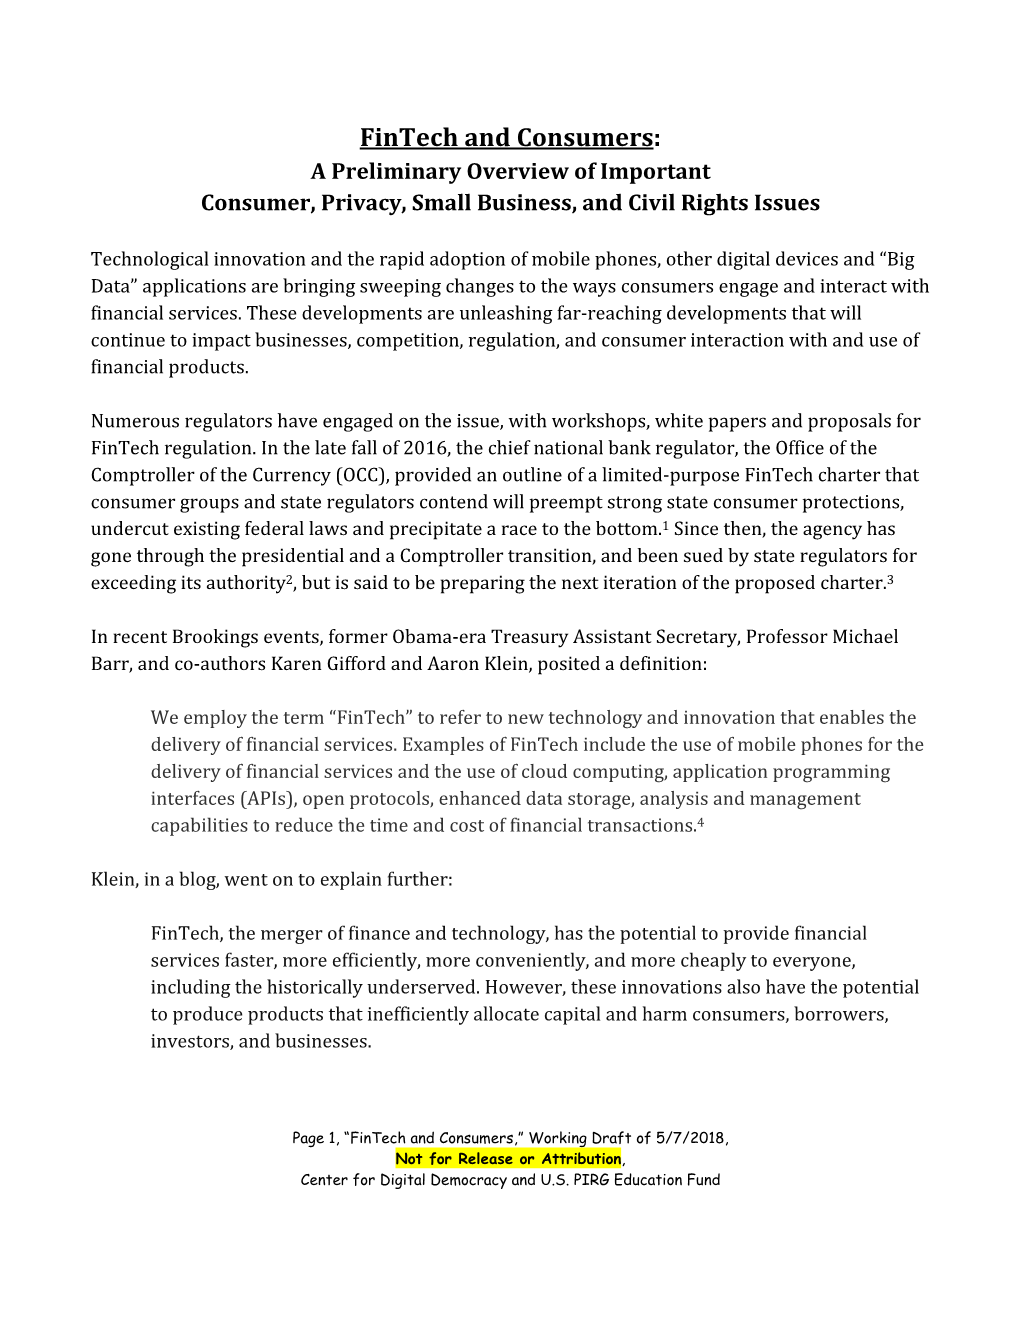 Fintech and Consumers: a Preliminary Overview of Important Consumer, Privacy, Small Business, and Civil Rights Issues